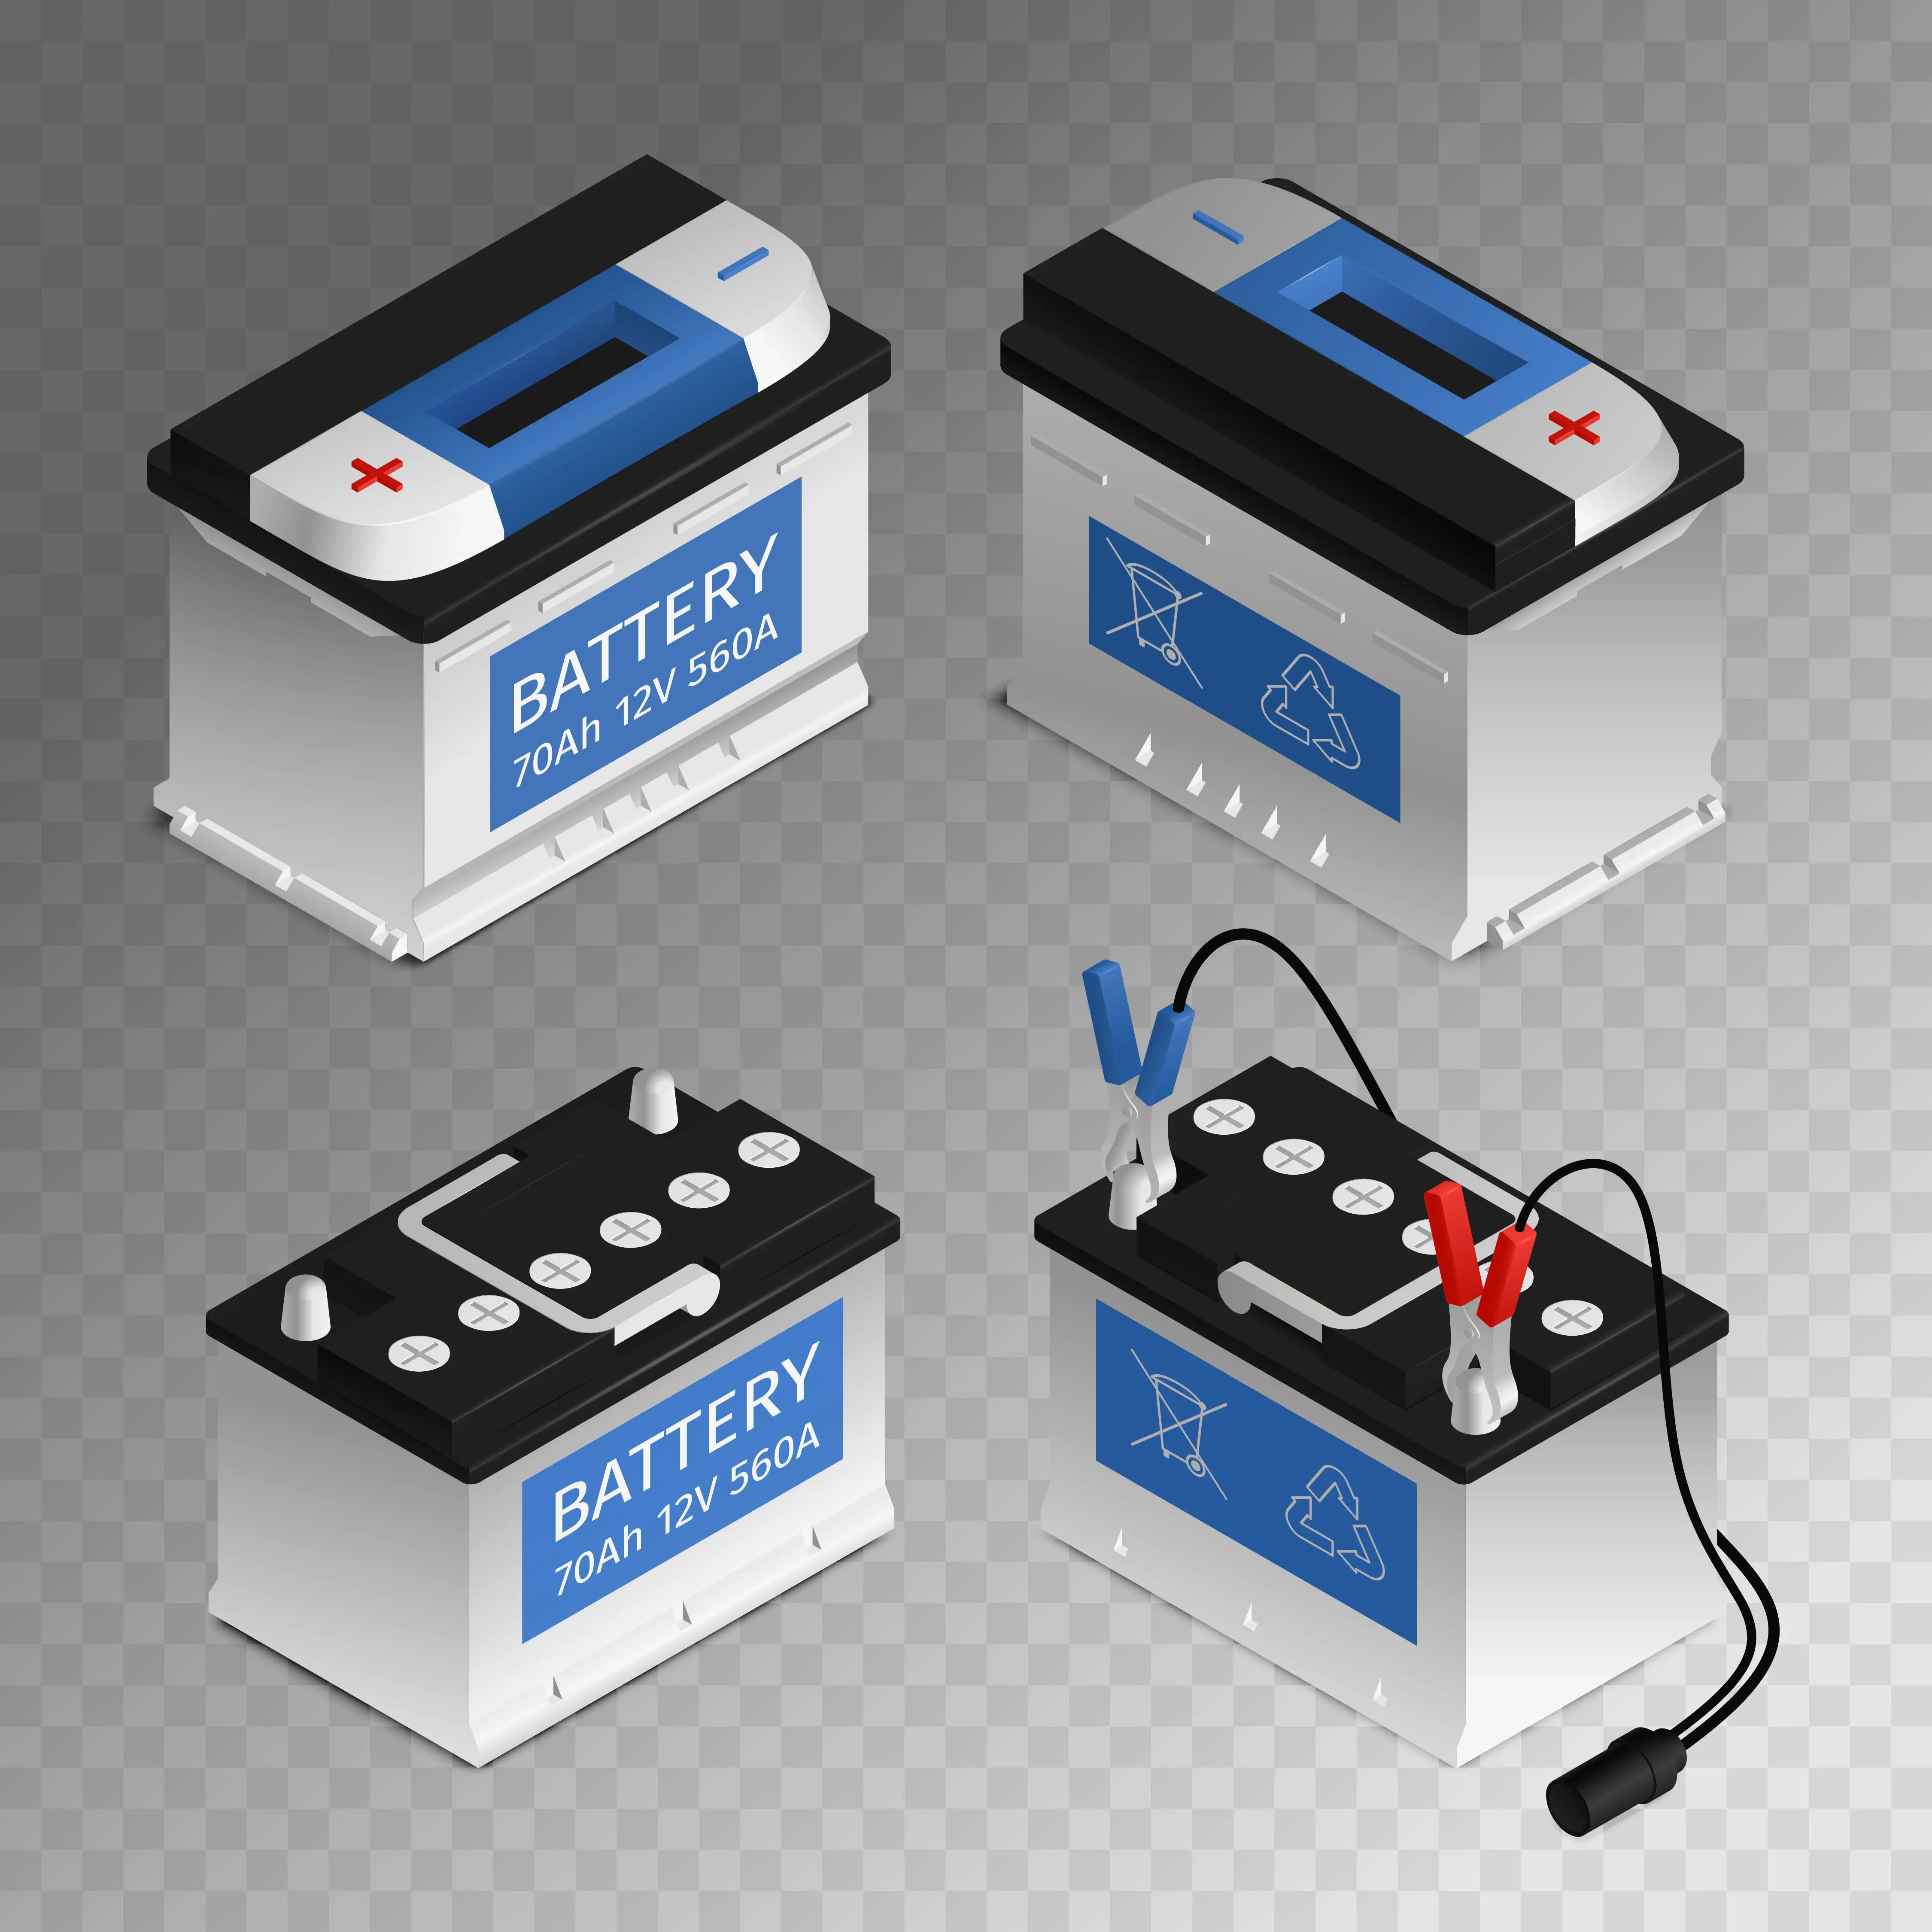 battery charger car battery battery electric car car charging electric vehicle car gear car charger charging battery charge cars automotive automotive car tools automobile power supply vehicle isometric car car engine engine car technology car illustration electric power electric wire car electric energy car transport isometric truck charger wire recharge electricity transport vehicle car truck voltage electrical tools